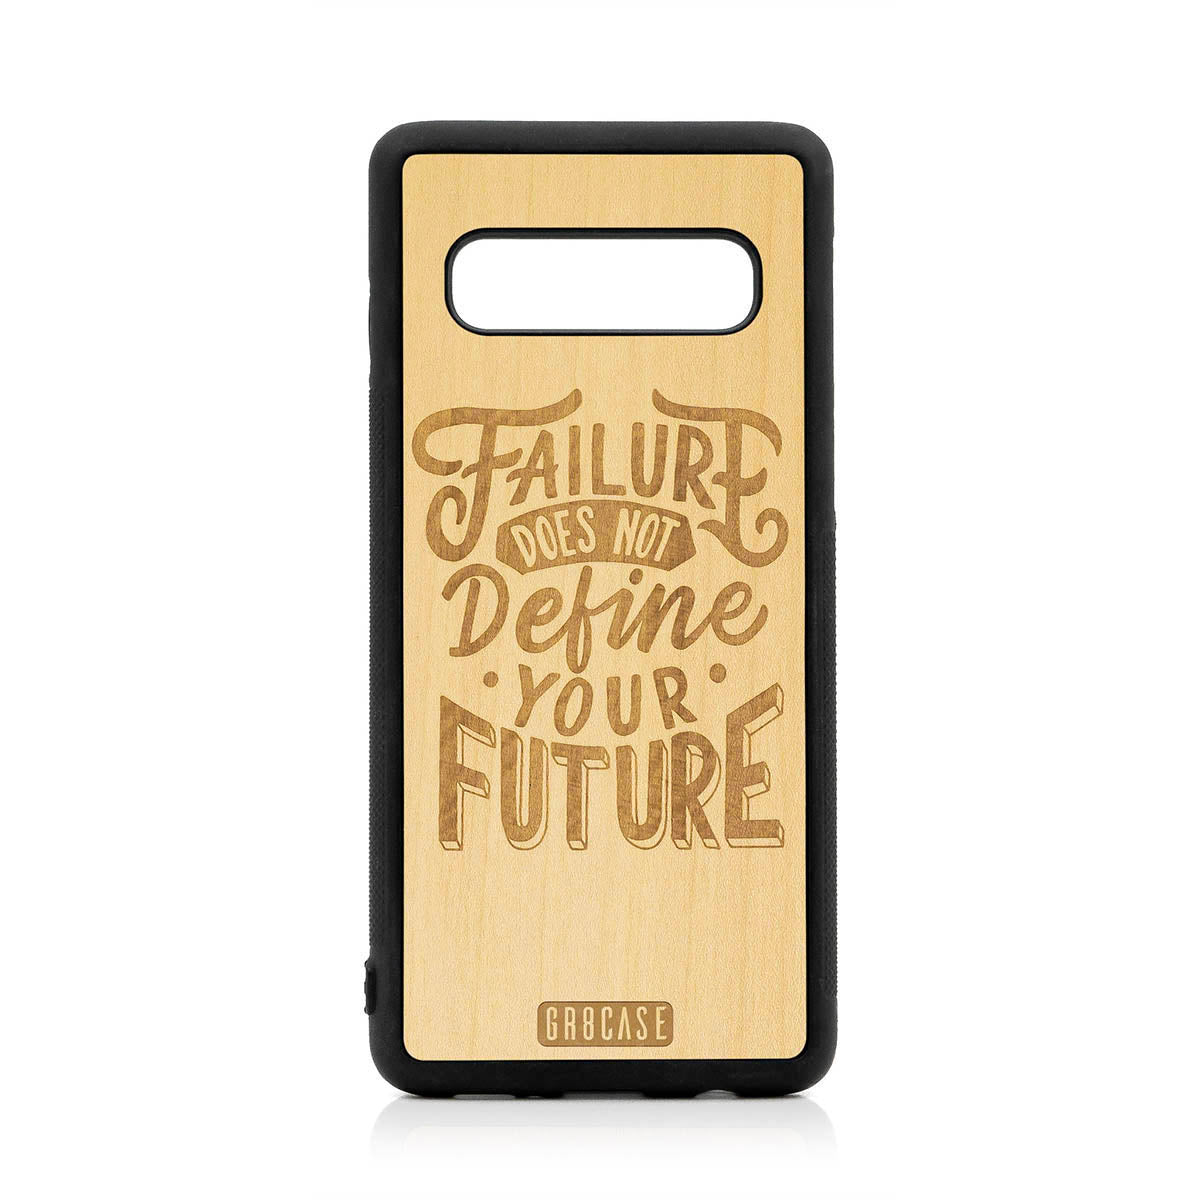 Failure Does Not Define You Future Design Wood Case For Samsung Galaxy S10 by GR8CASE